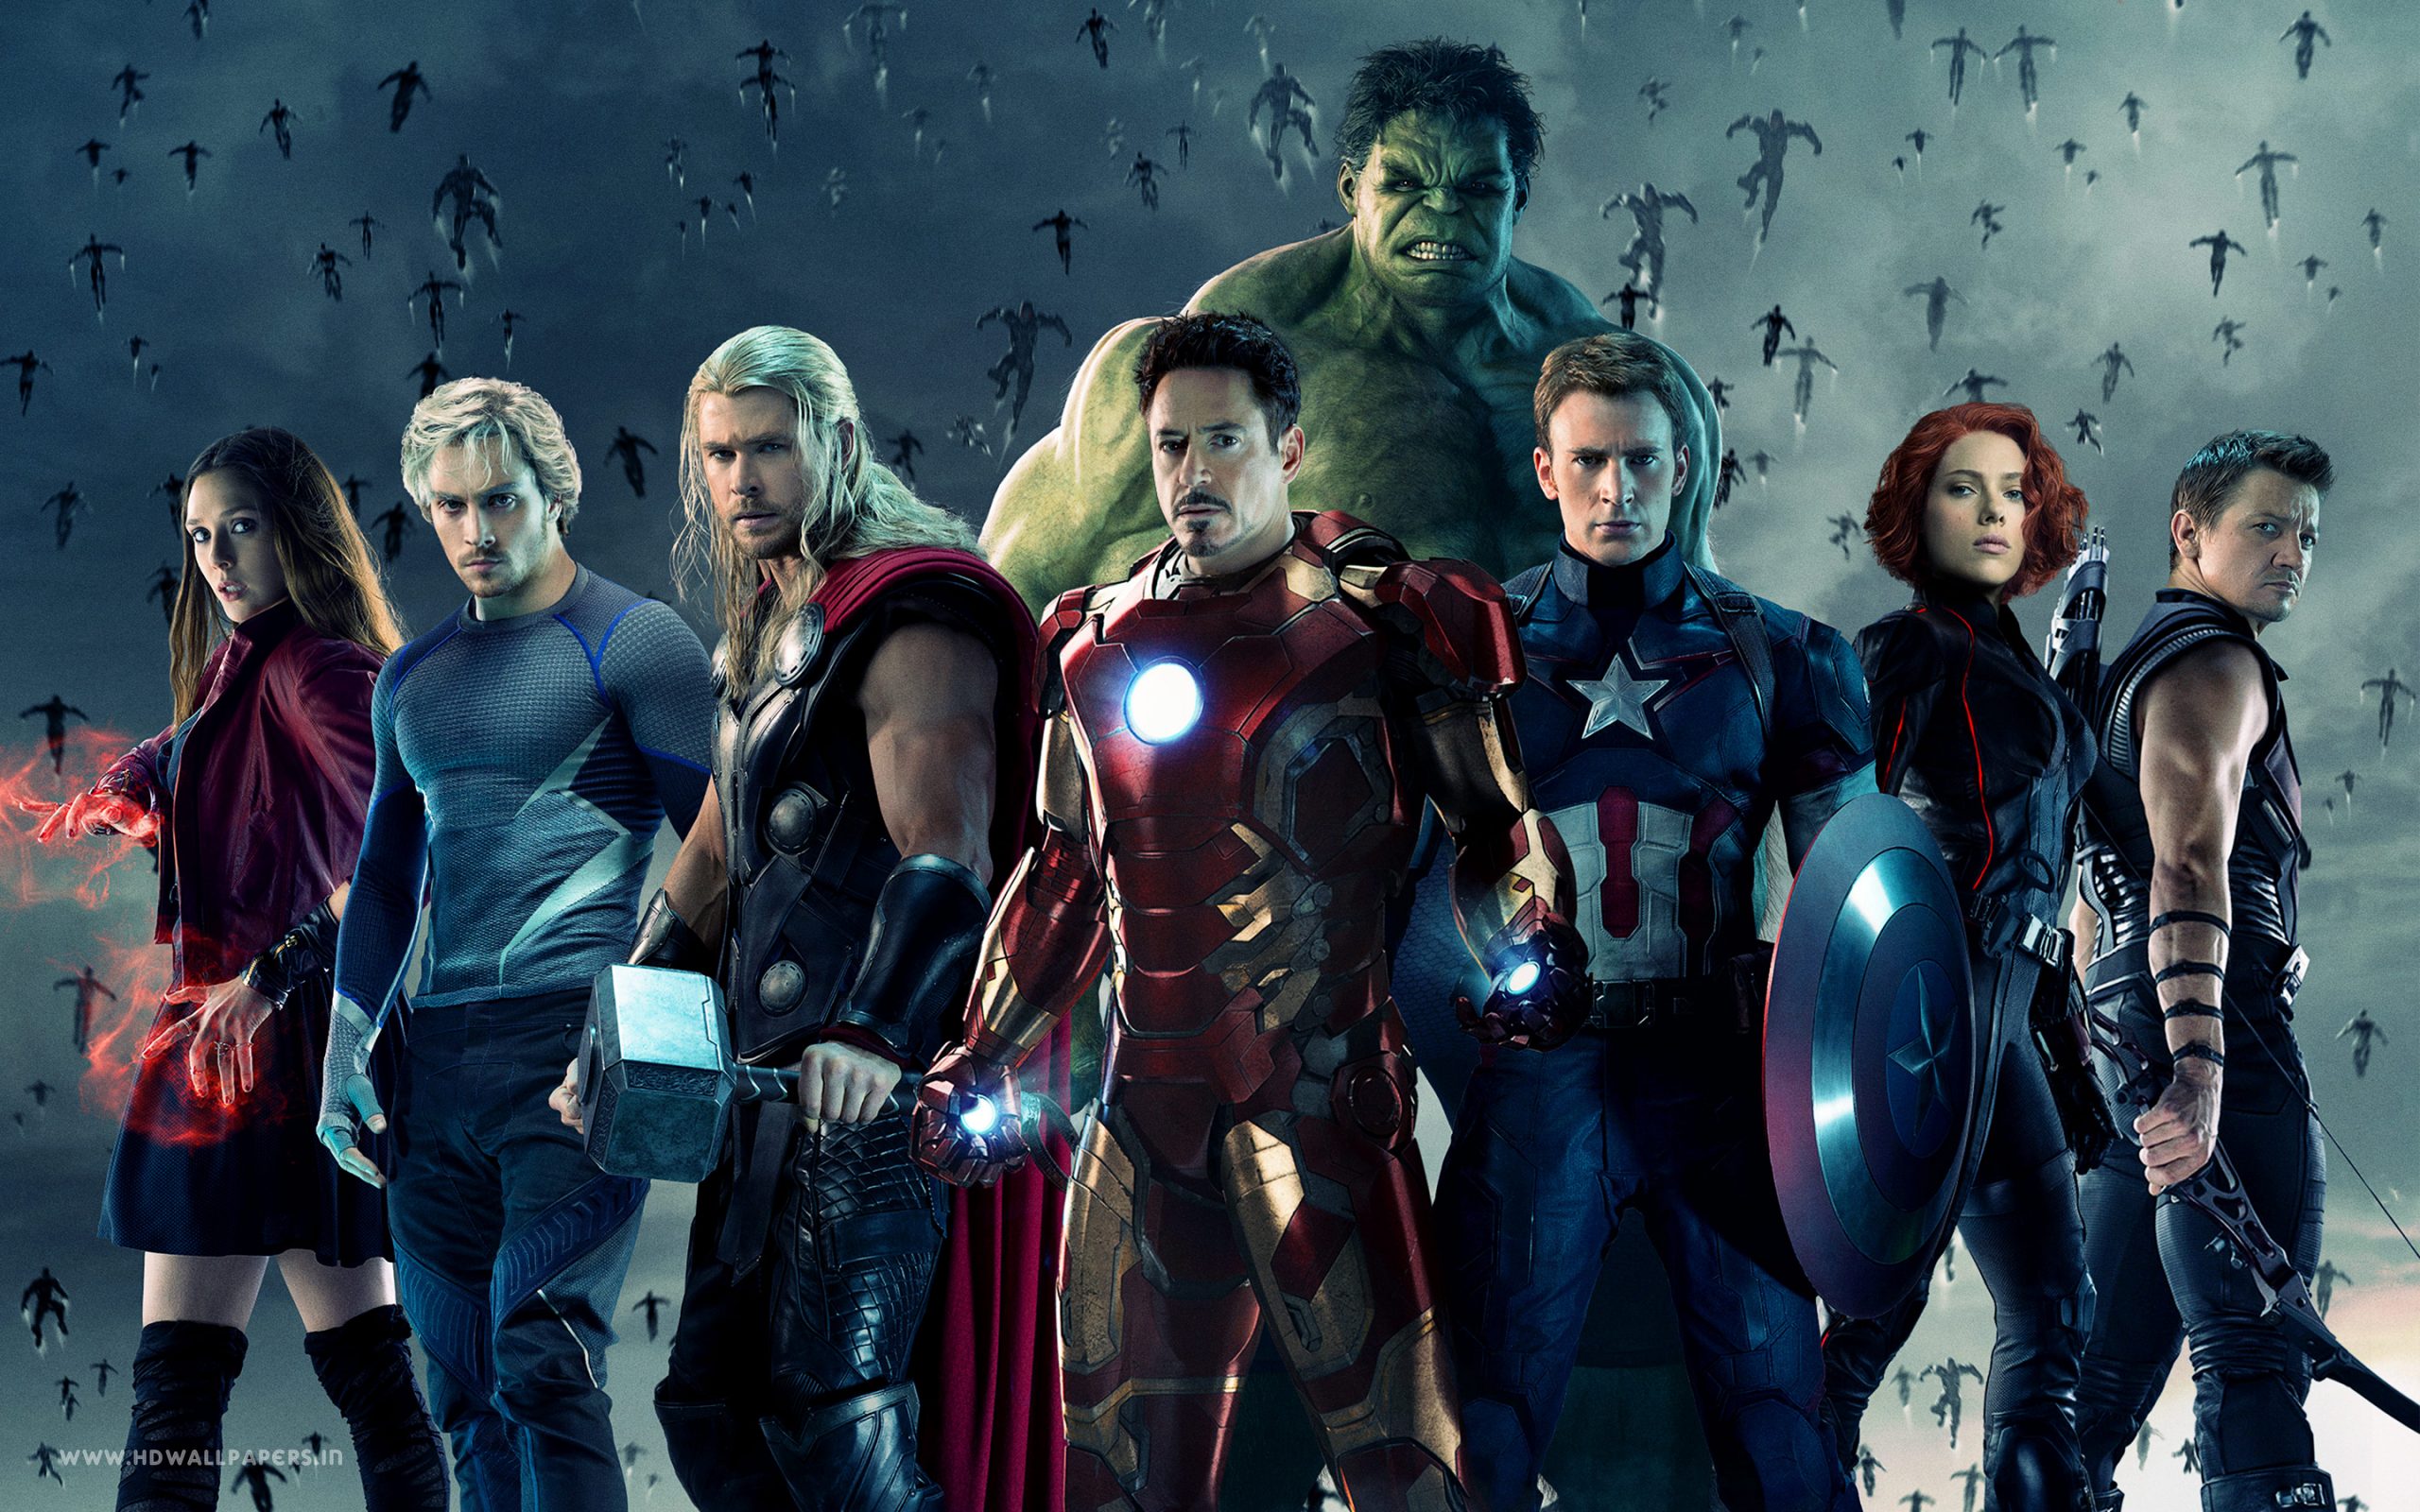 Avengers: Age of Ultron Rumors - Everything We Know (And Think We Know) So Far